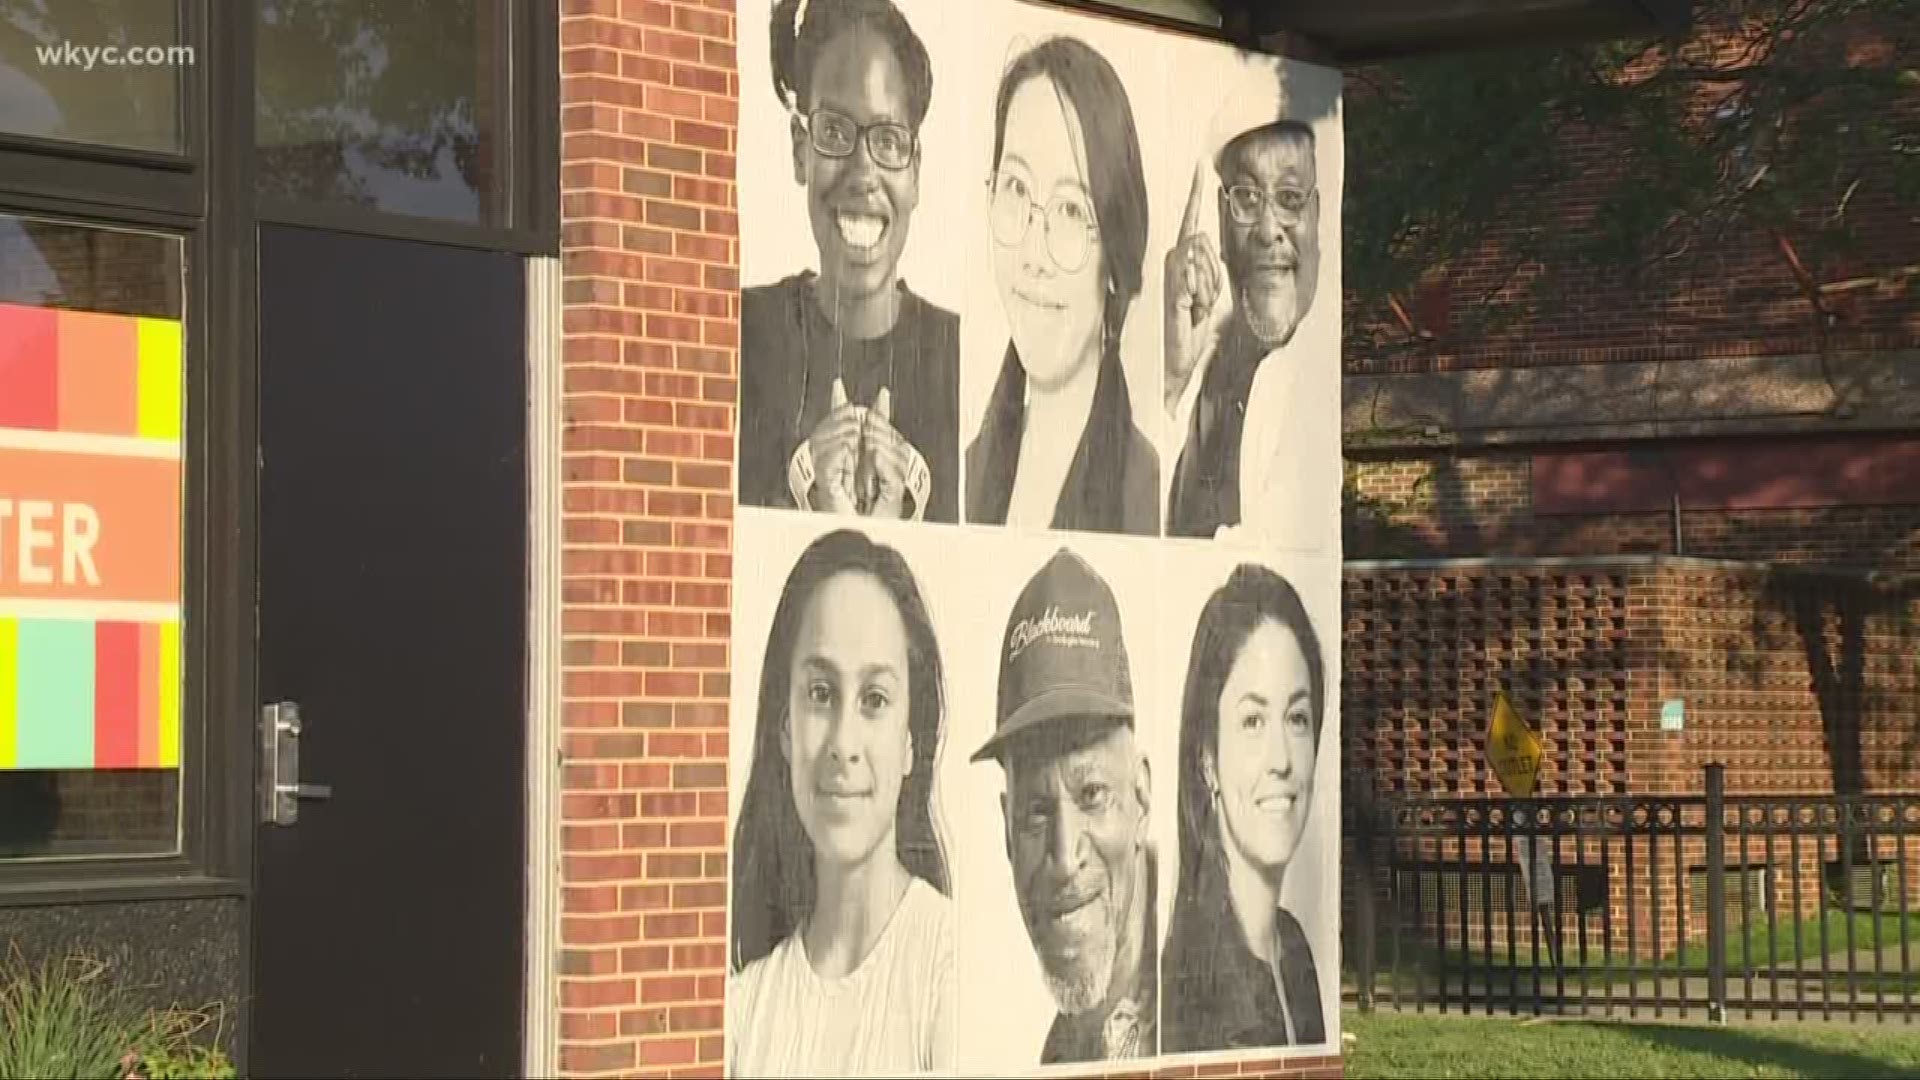 Creators of a new art exhibit in Cleveland's Ohio City neighborhood are hoping it's a driving force to build more unity.